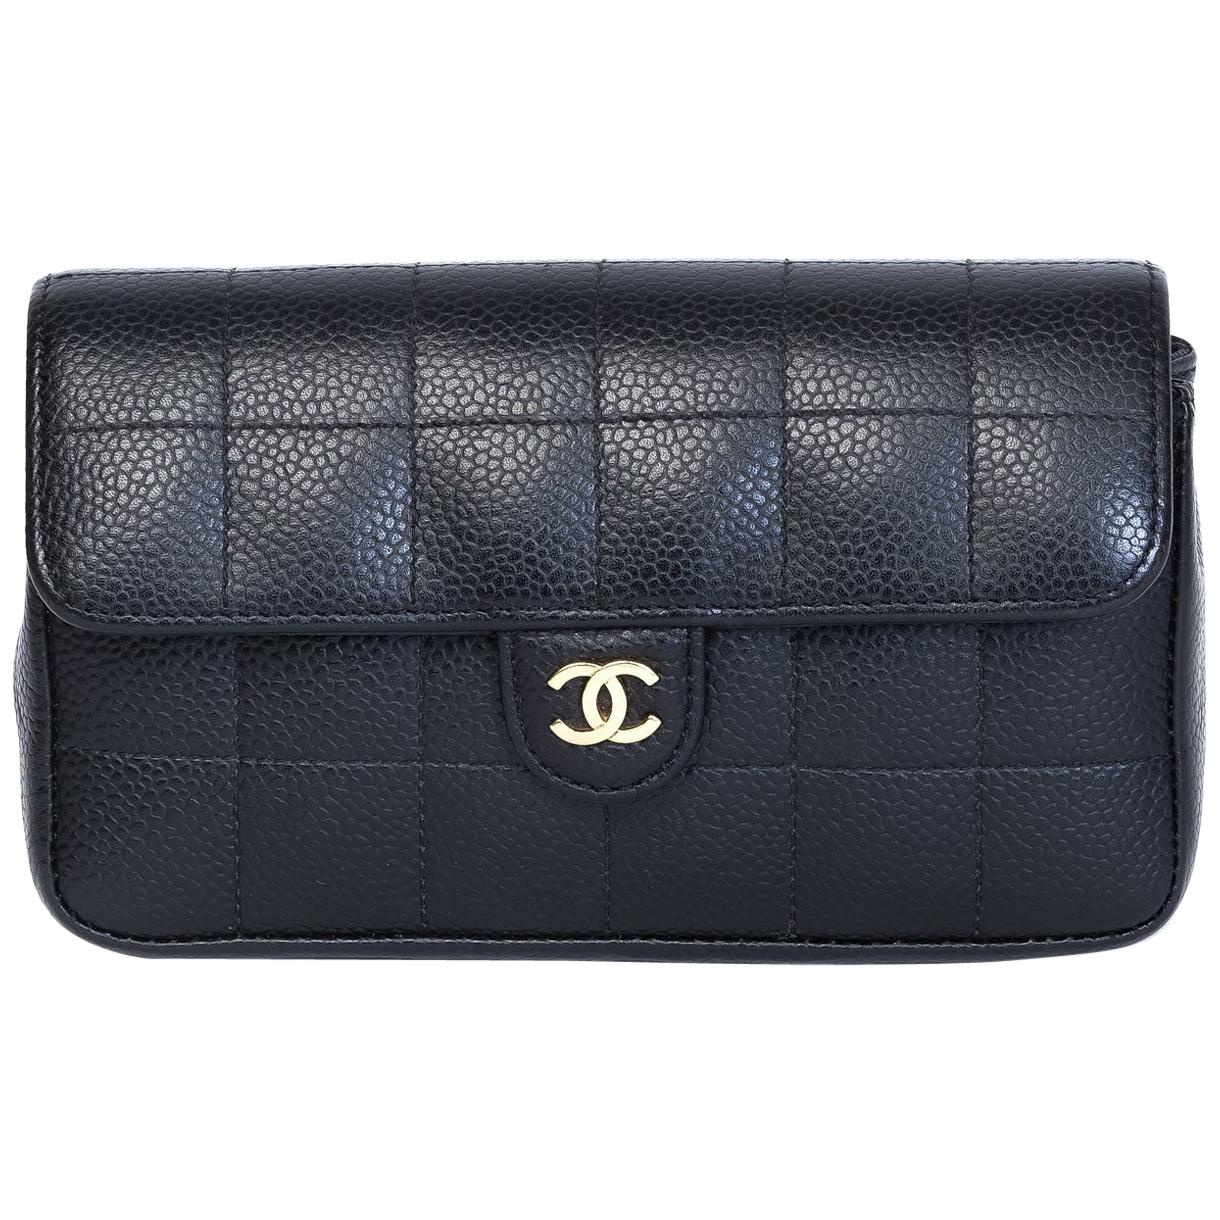 Chanel Vintage Caviar Square Quilted Mini Classic Fanny Pack Waist Belt Bag